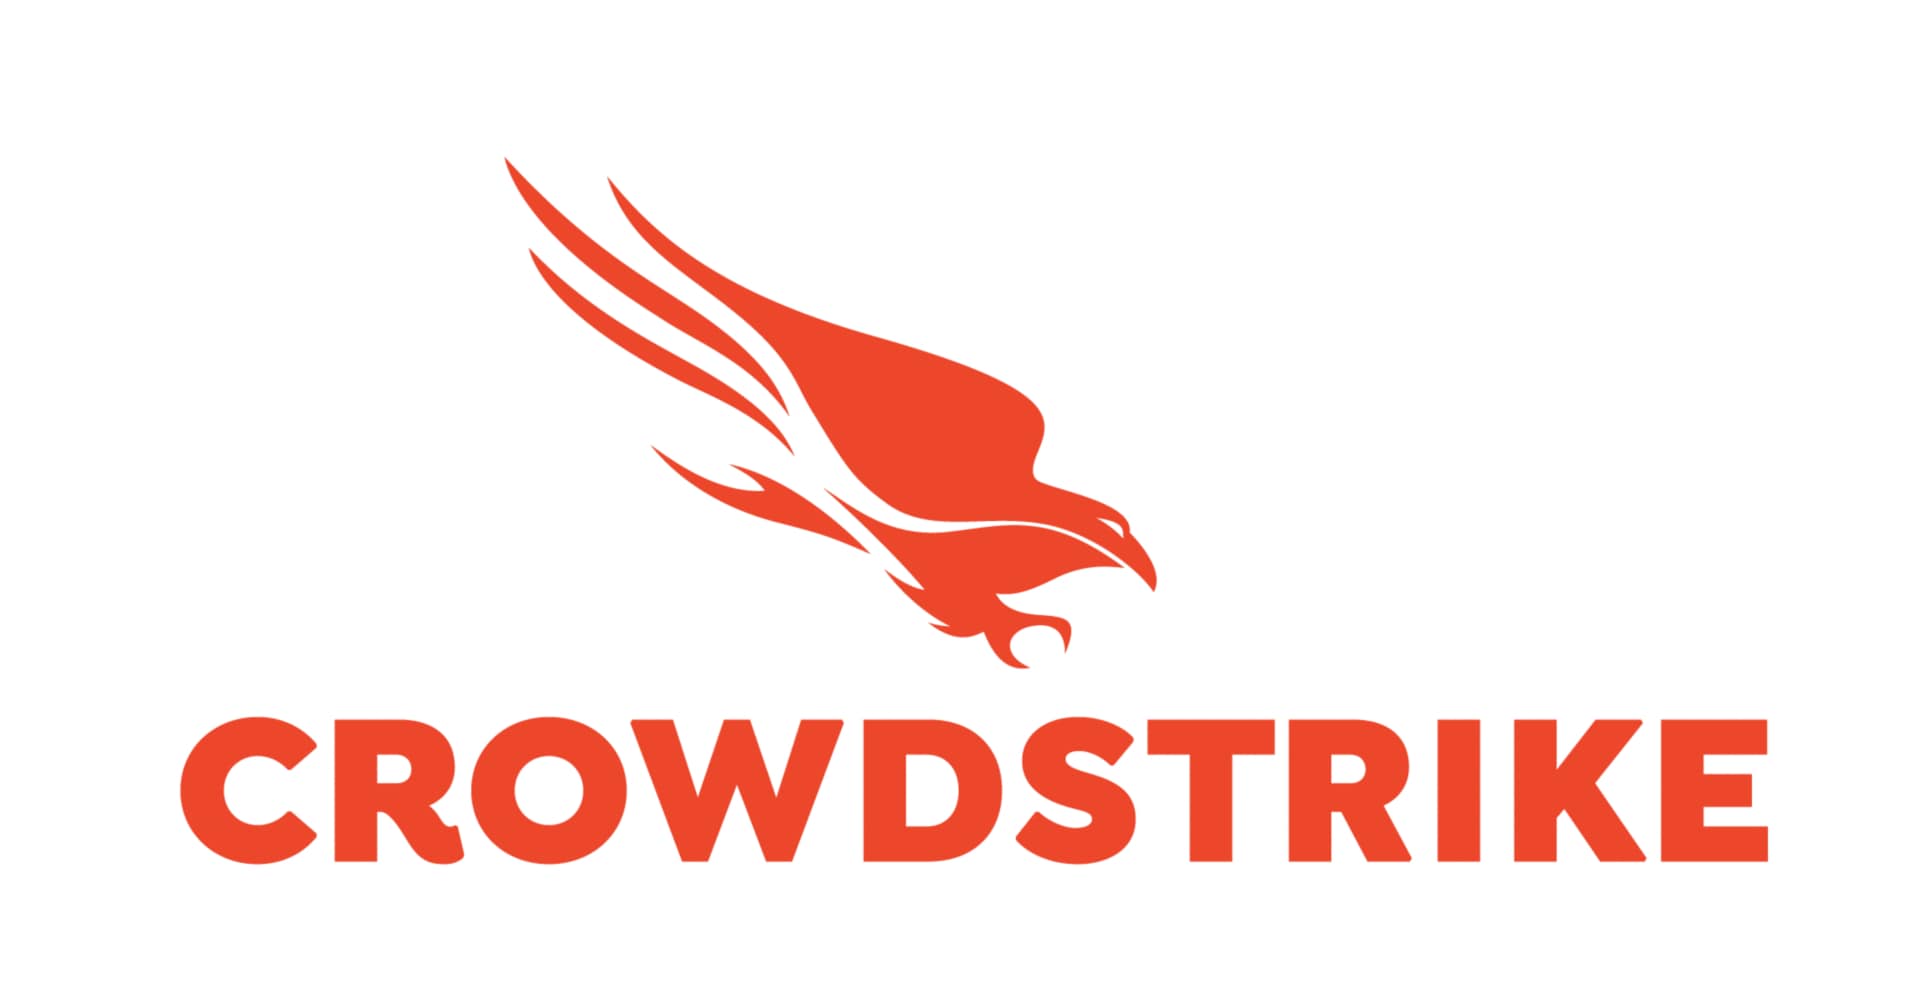 CrowdStrike 5-Month Humio Cloud for Falcon 60 Day Retention Software Subscription (1-149 Licenses)